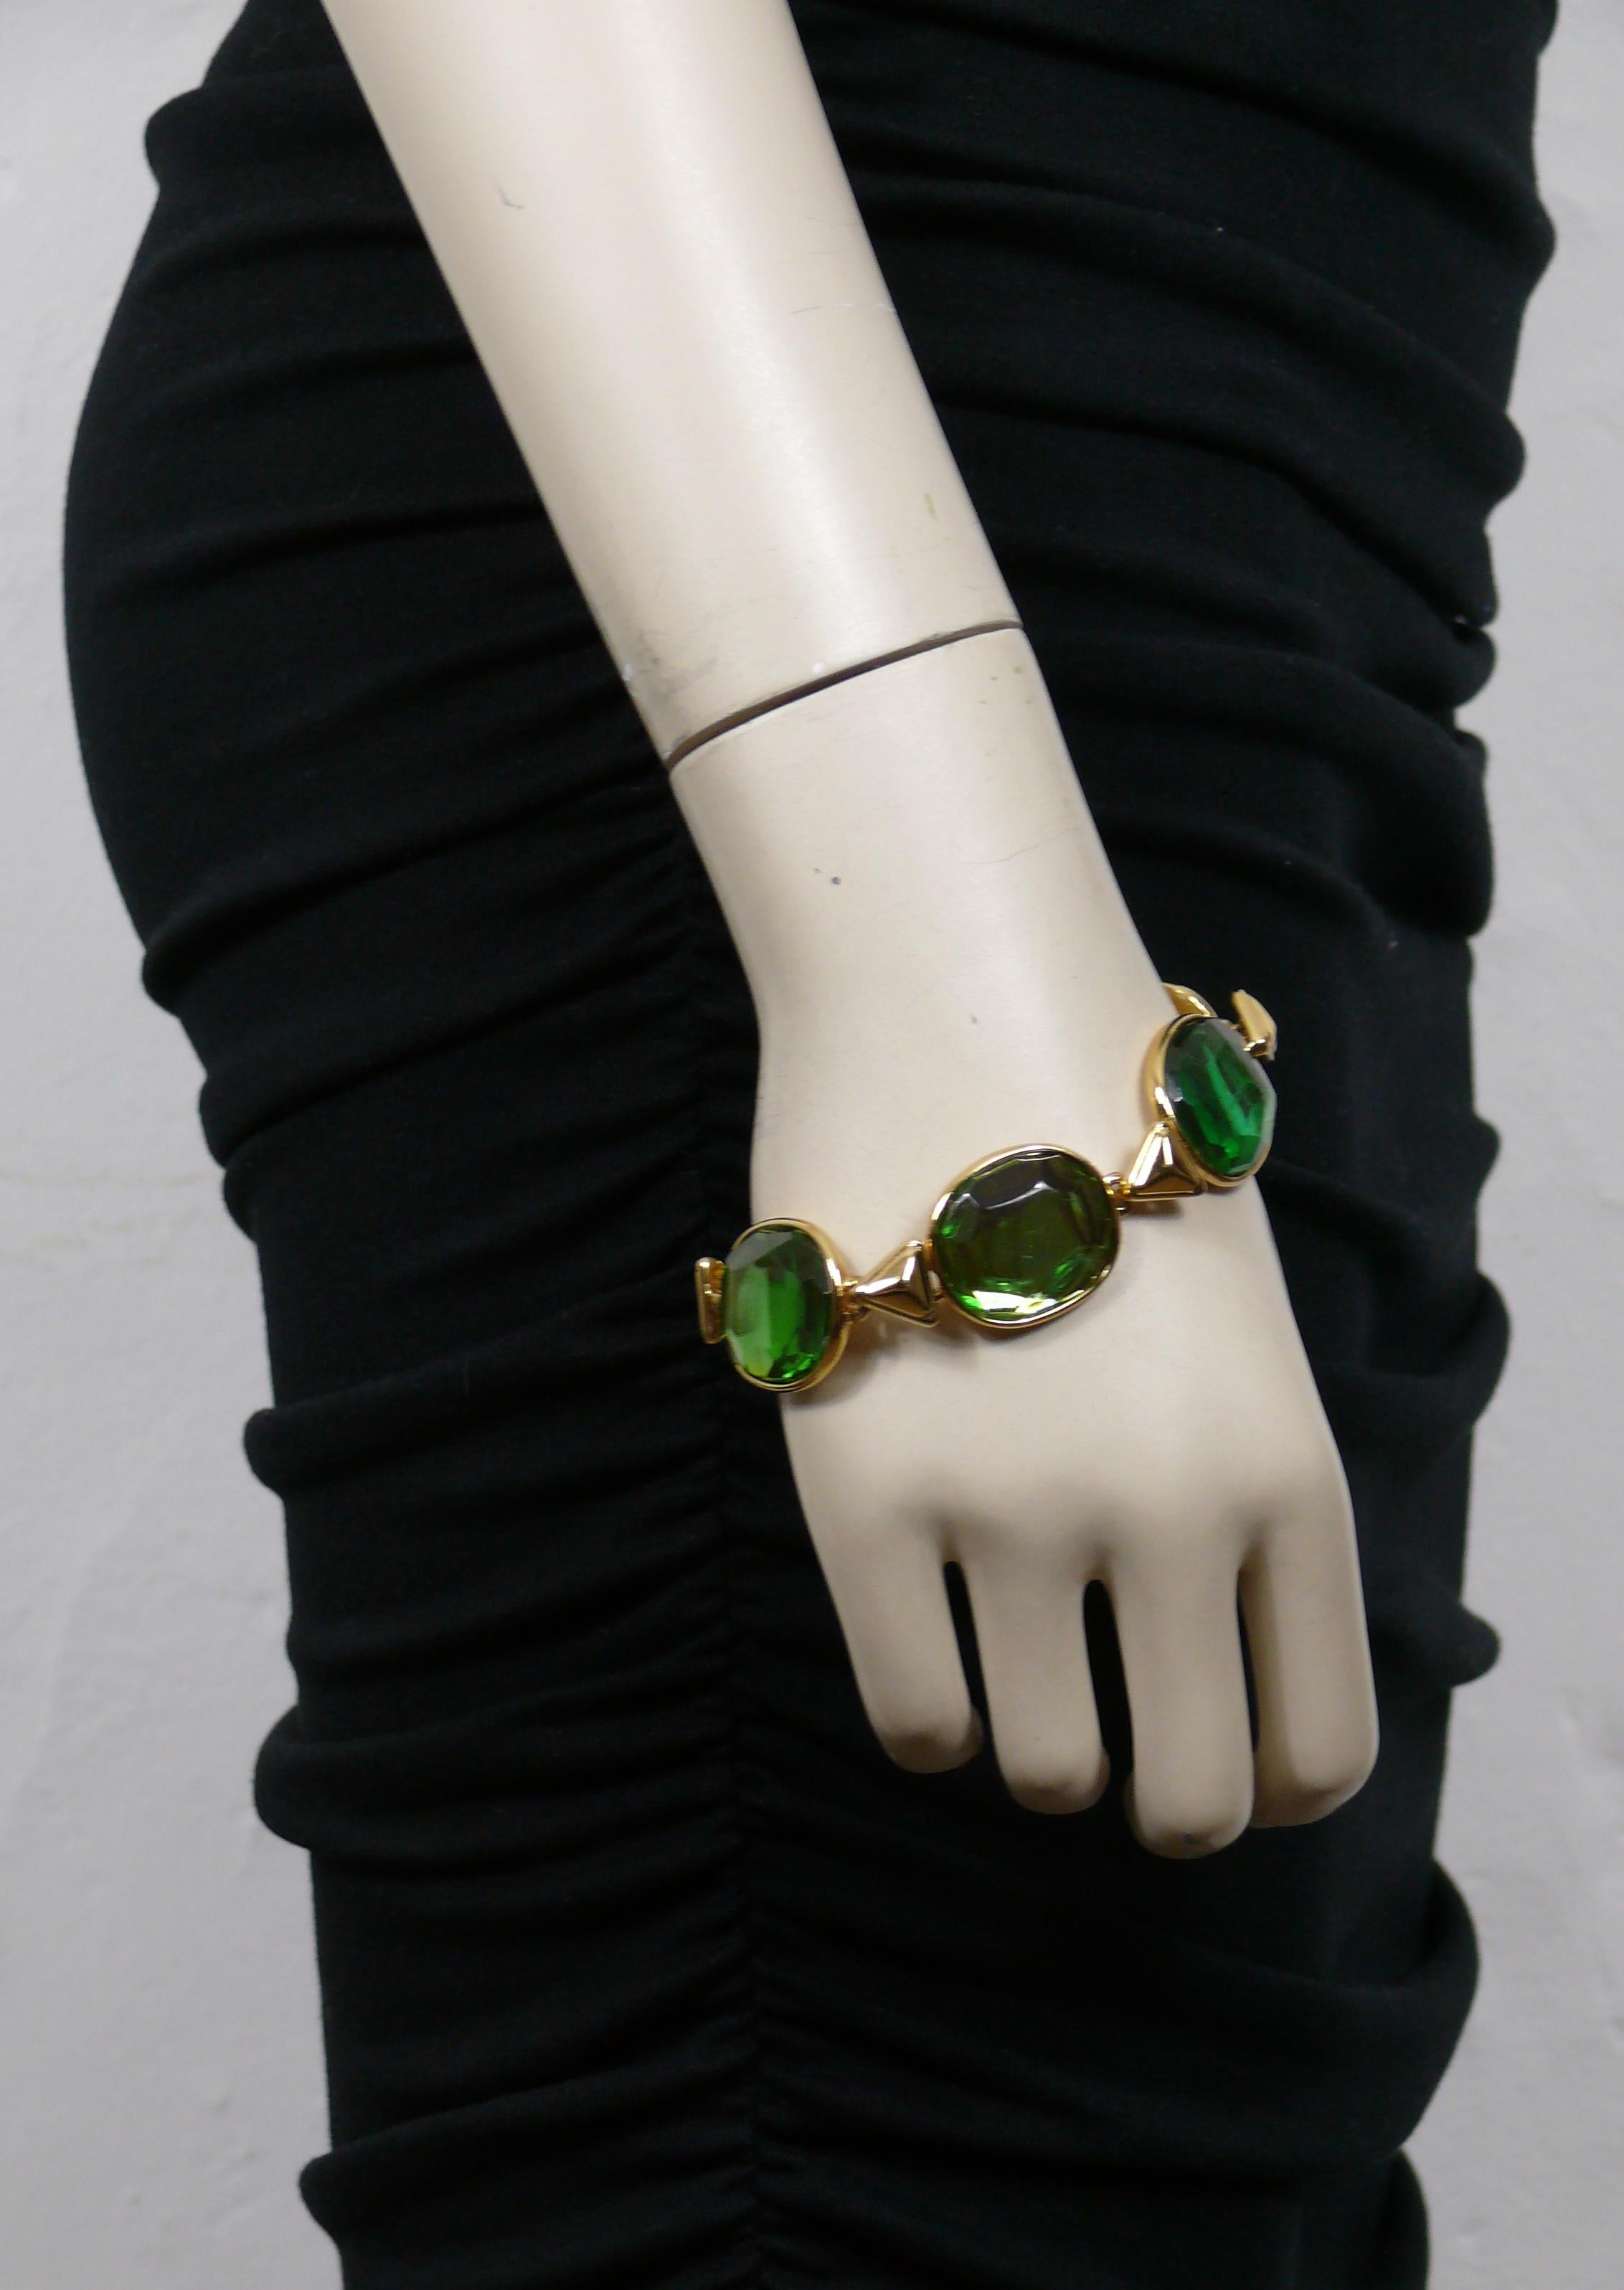 YVES SAINT LAURENT vintage gold tone link bracelet featuring facetted green resin cabochons.

Lobster clasp closure.

Embossed YSL Made in France.

Indicative measurements : length approx. 20.5 cm (8.07 inches) / max. width approx. 2.2 cm (0.87